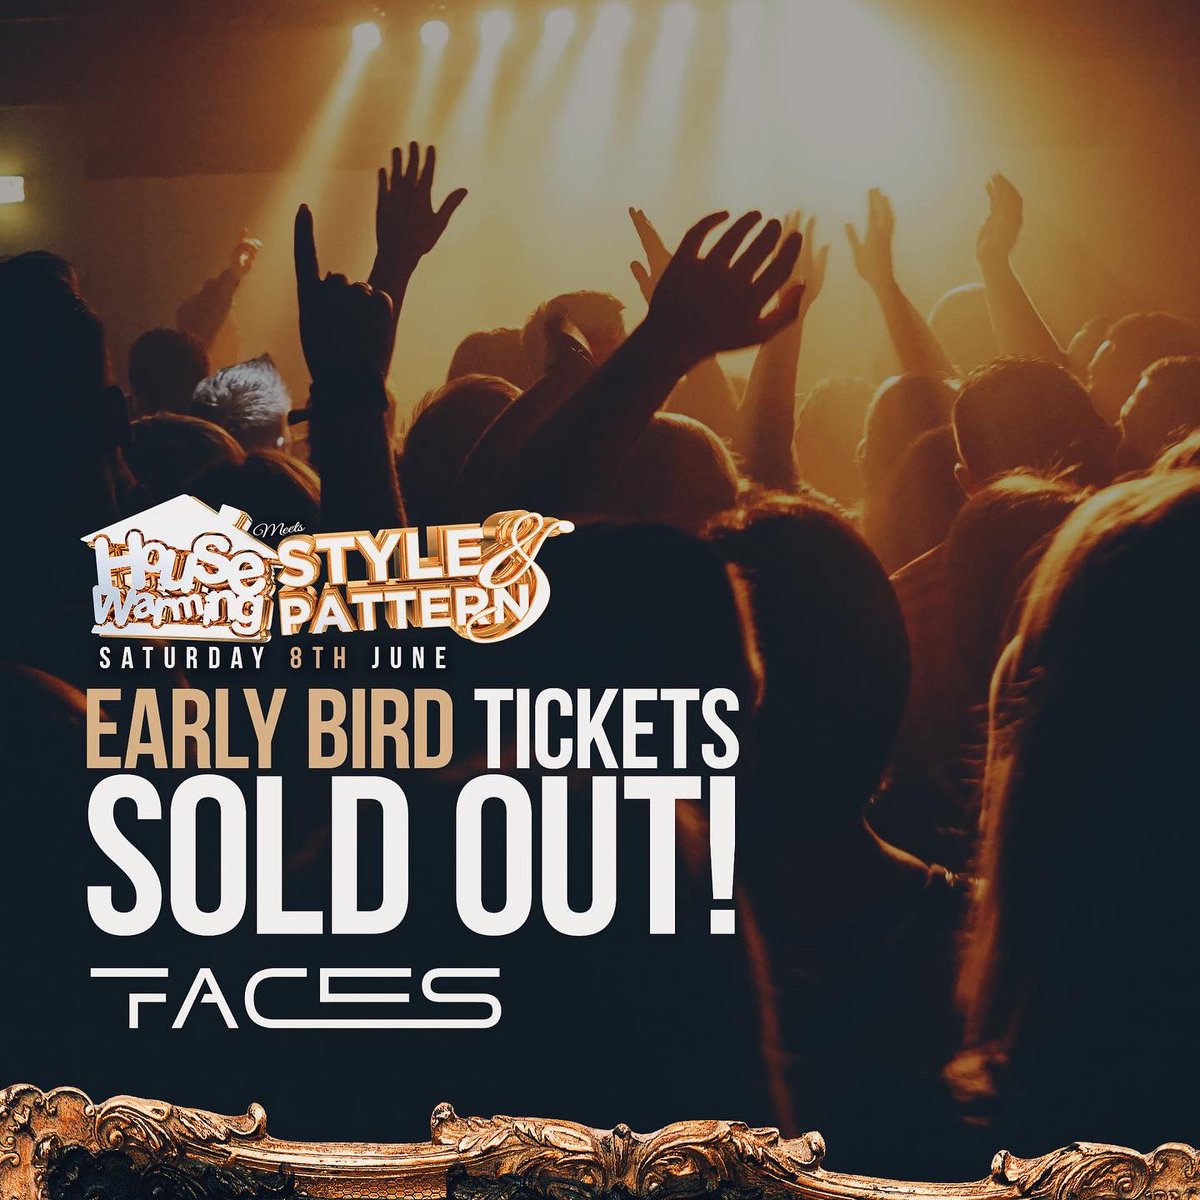 EARLYBIRD TICKETS SELL ARF! Don’t miss out! Saturday 8th June! See you there! 🥂 skiddle.com/e/38199761